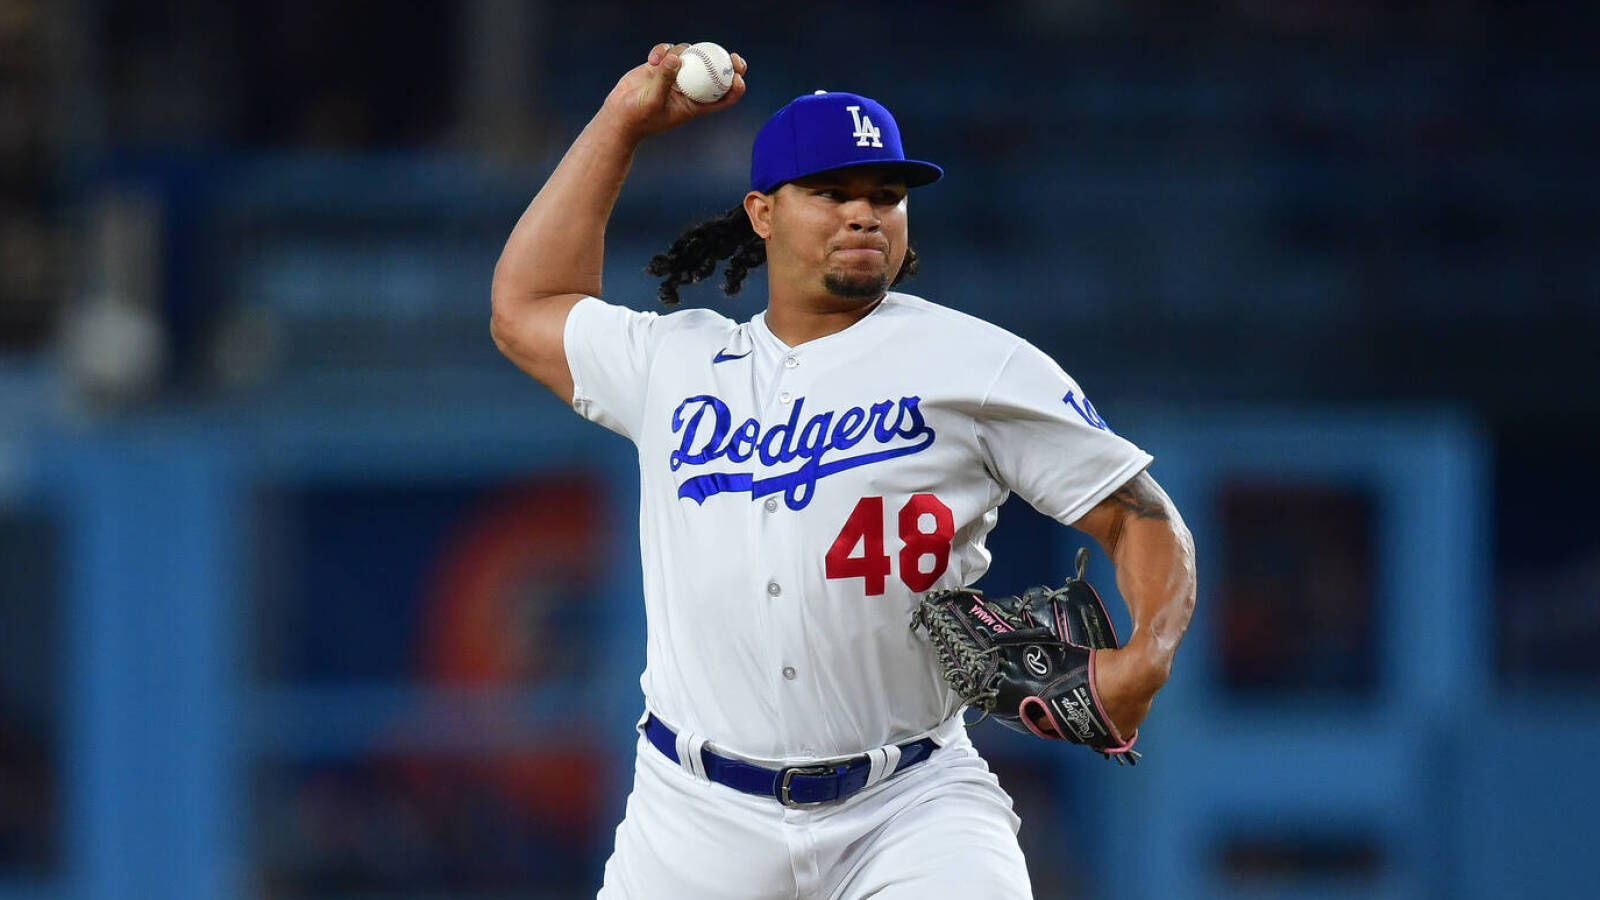 Dodgers reliever has long-awaited reunion, pitches scoreless inning vs. Tigers